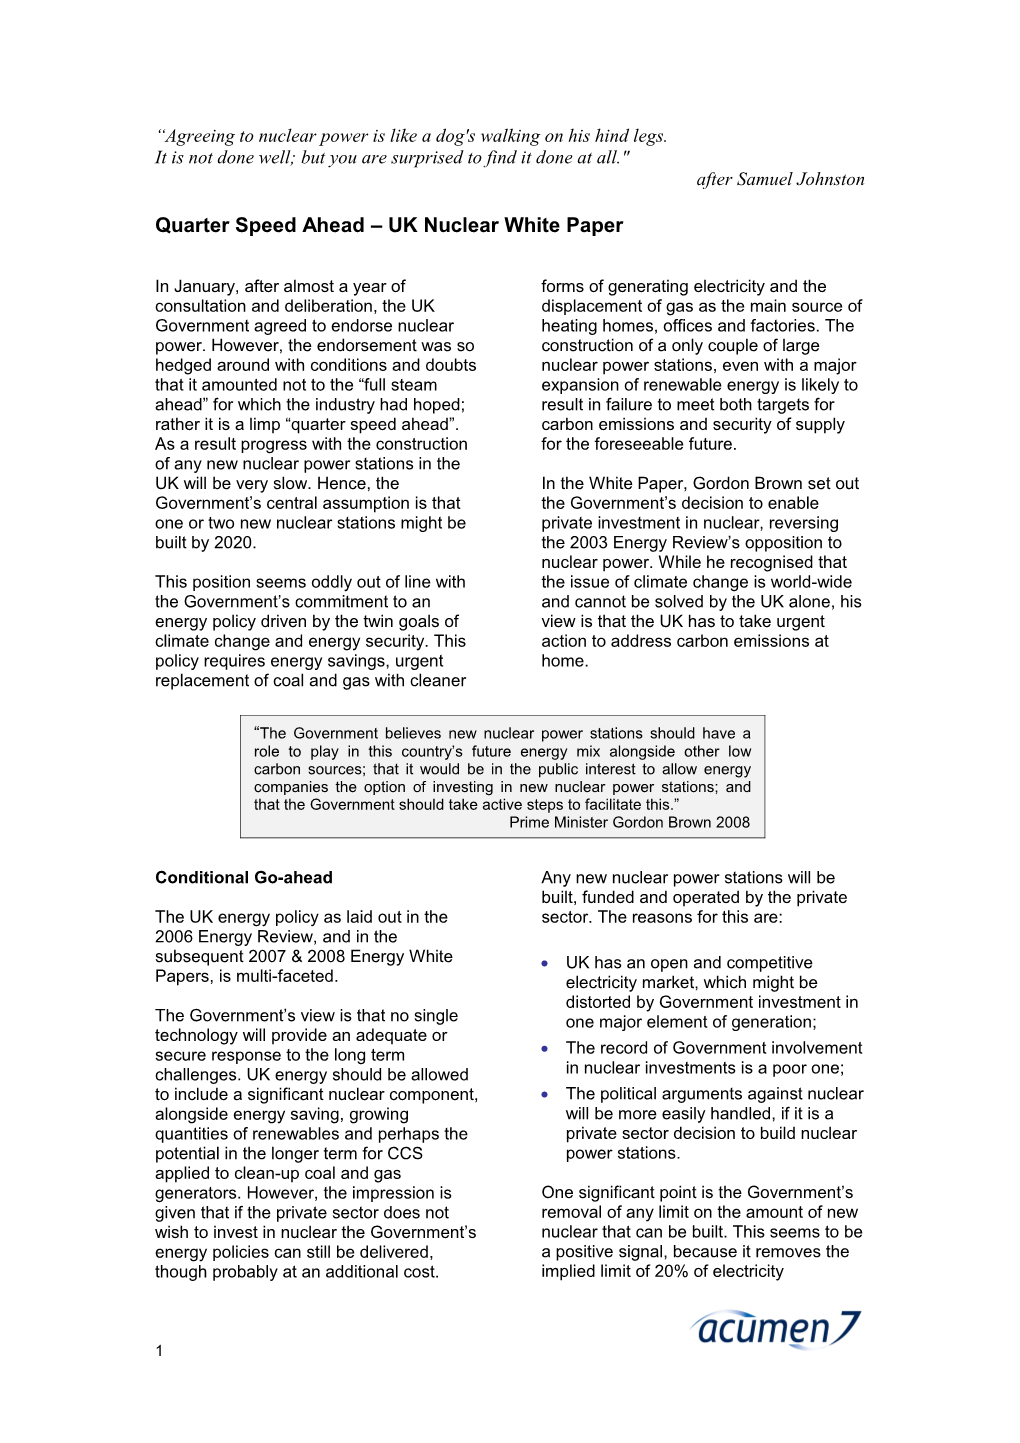 Meeting the Energy Challenges Nuclear White Paper January 2008